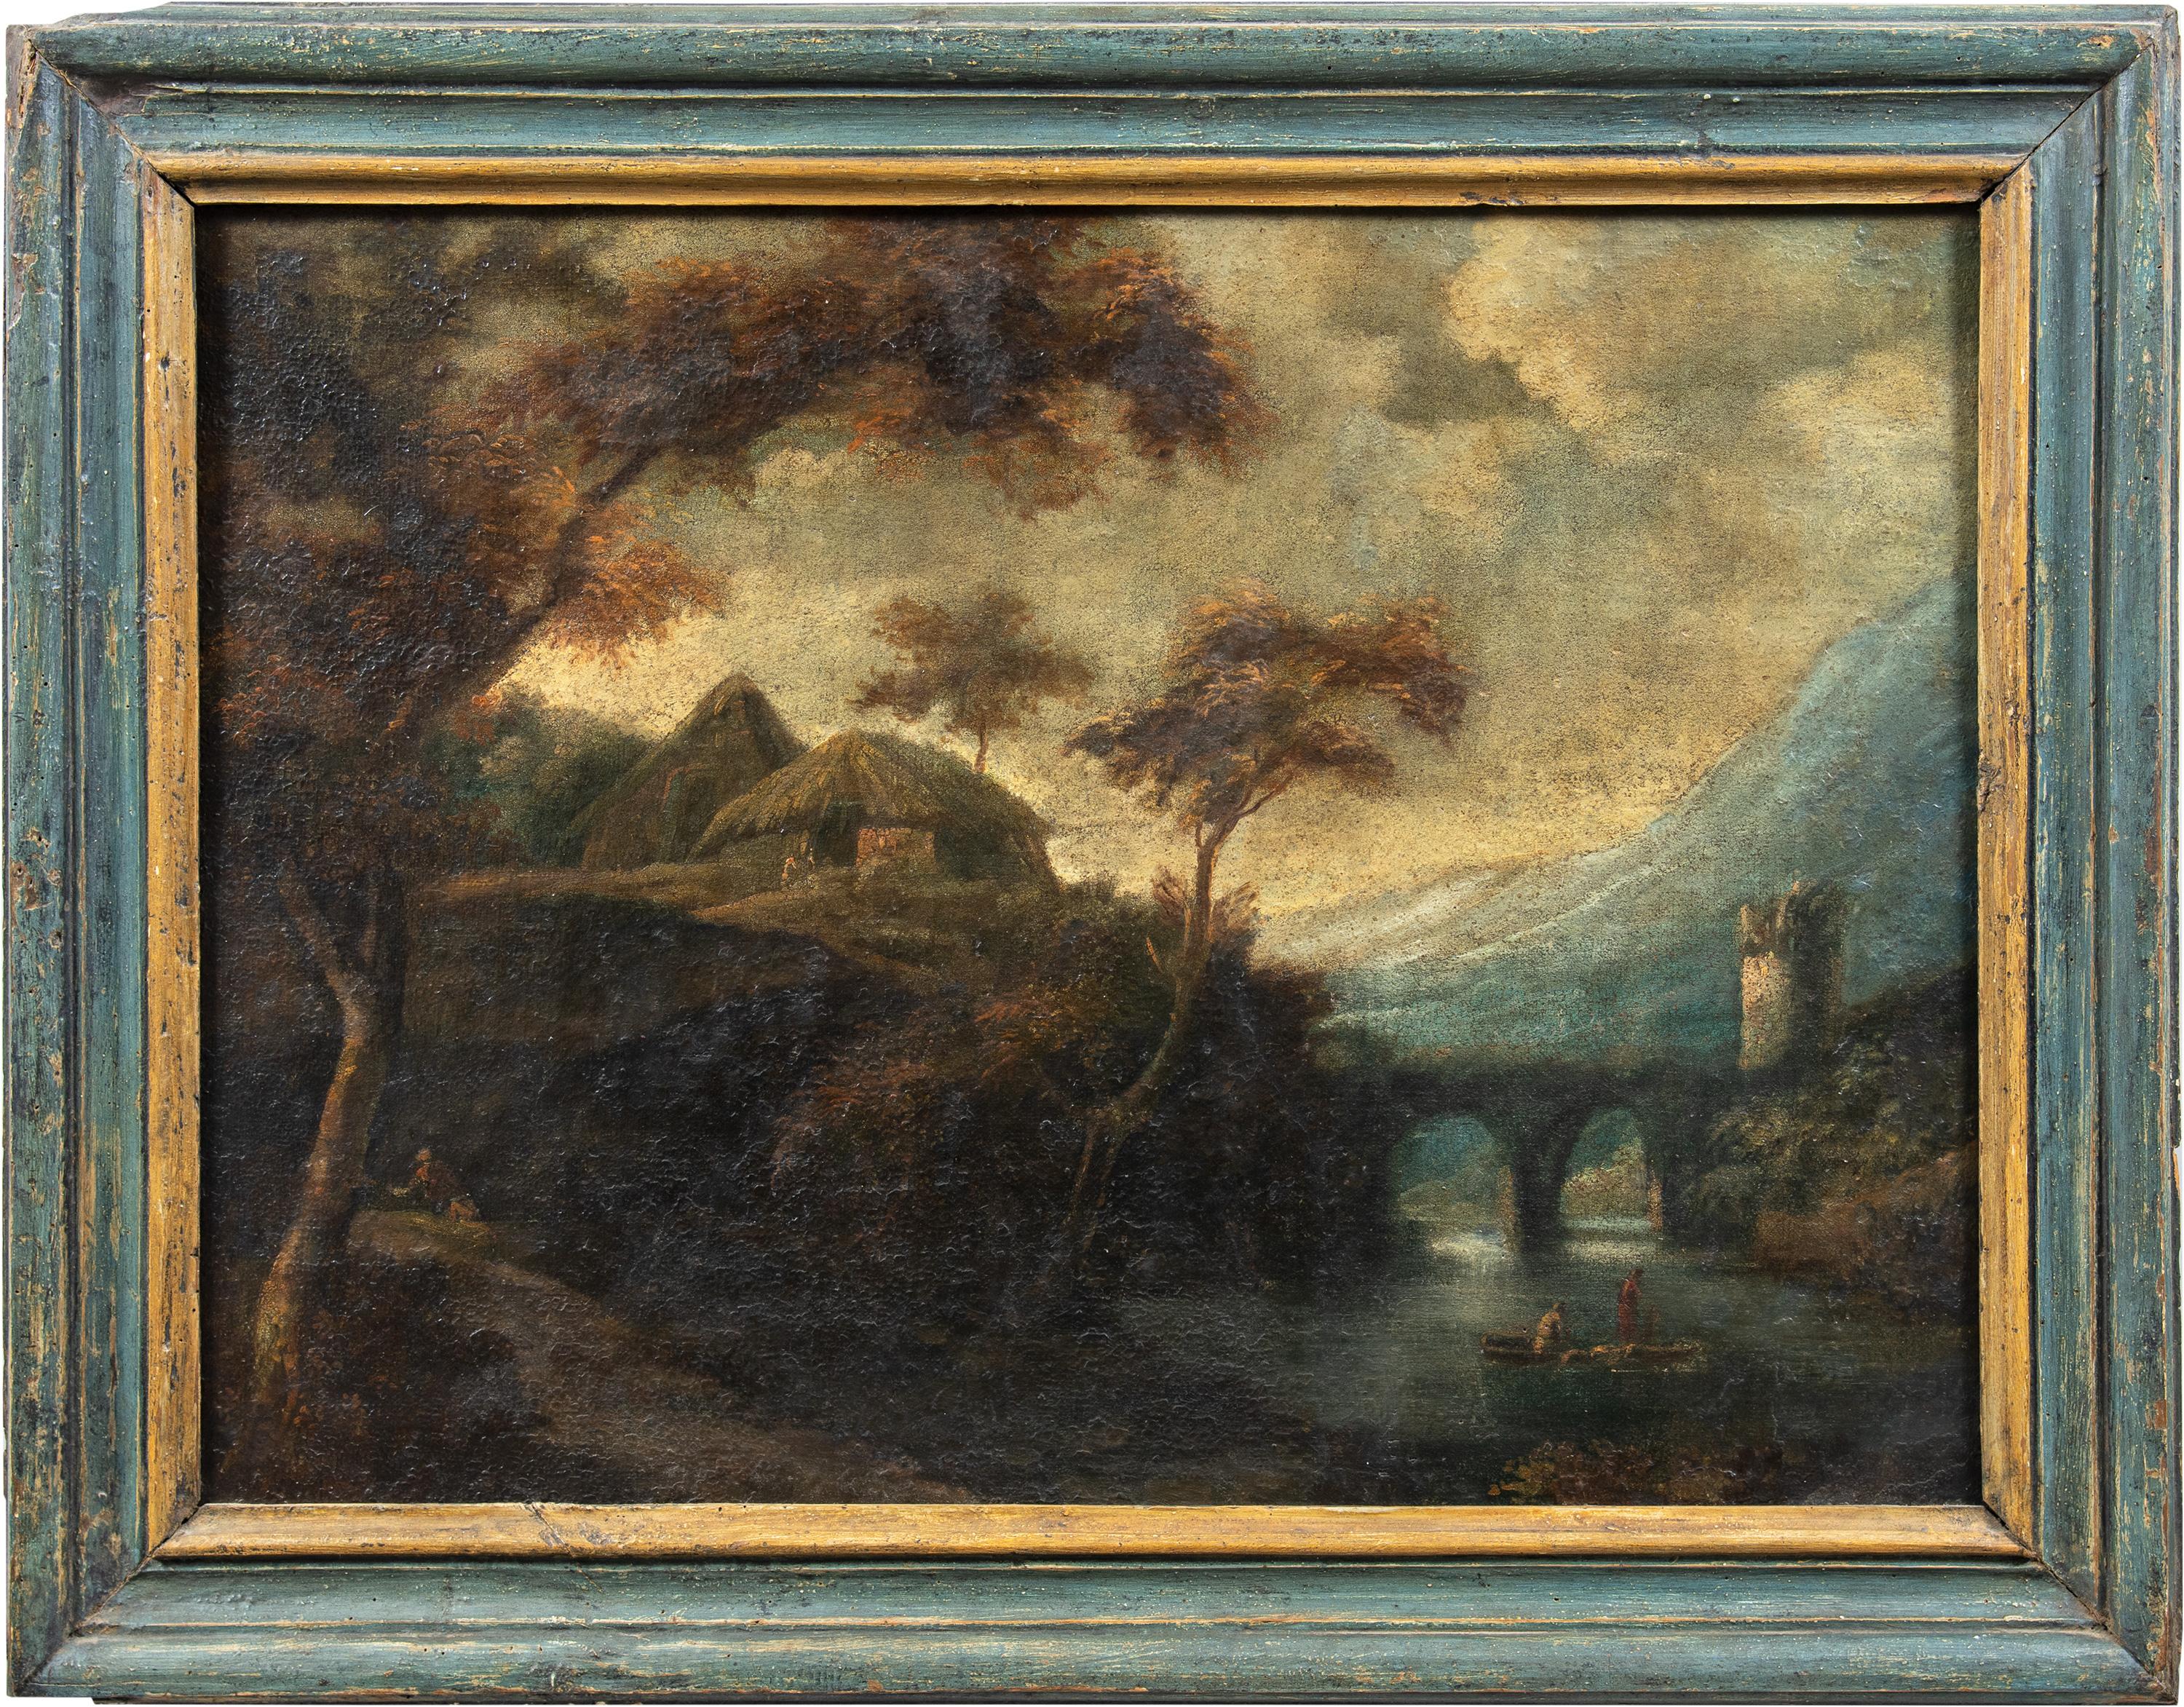 Unknown Figurative Painting - Baroque Italian painter - 18th century painting - Landscape figures 